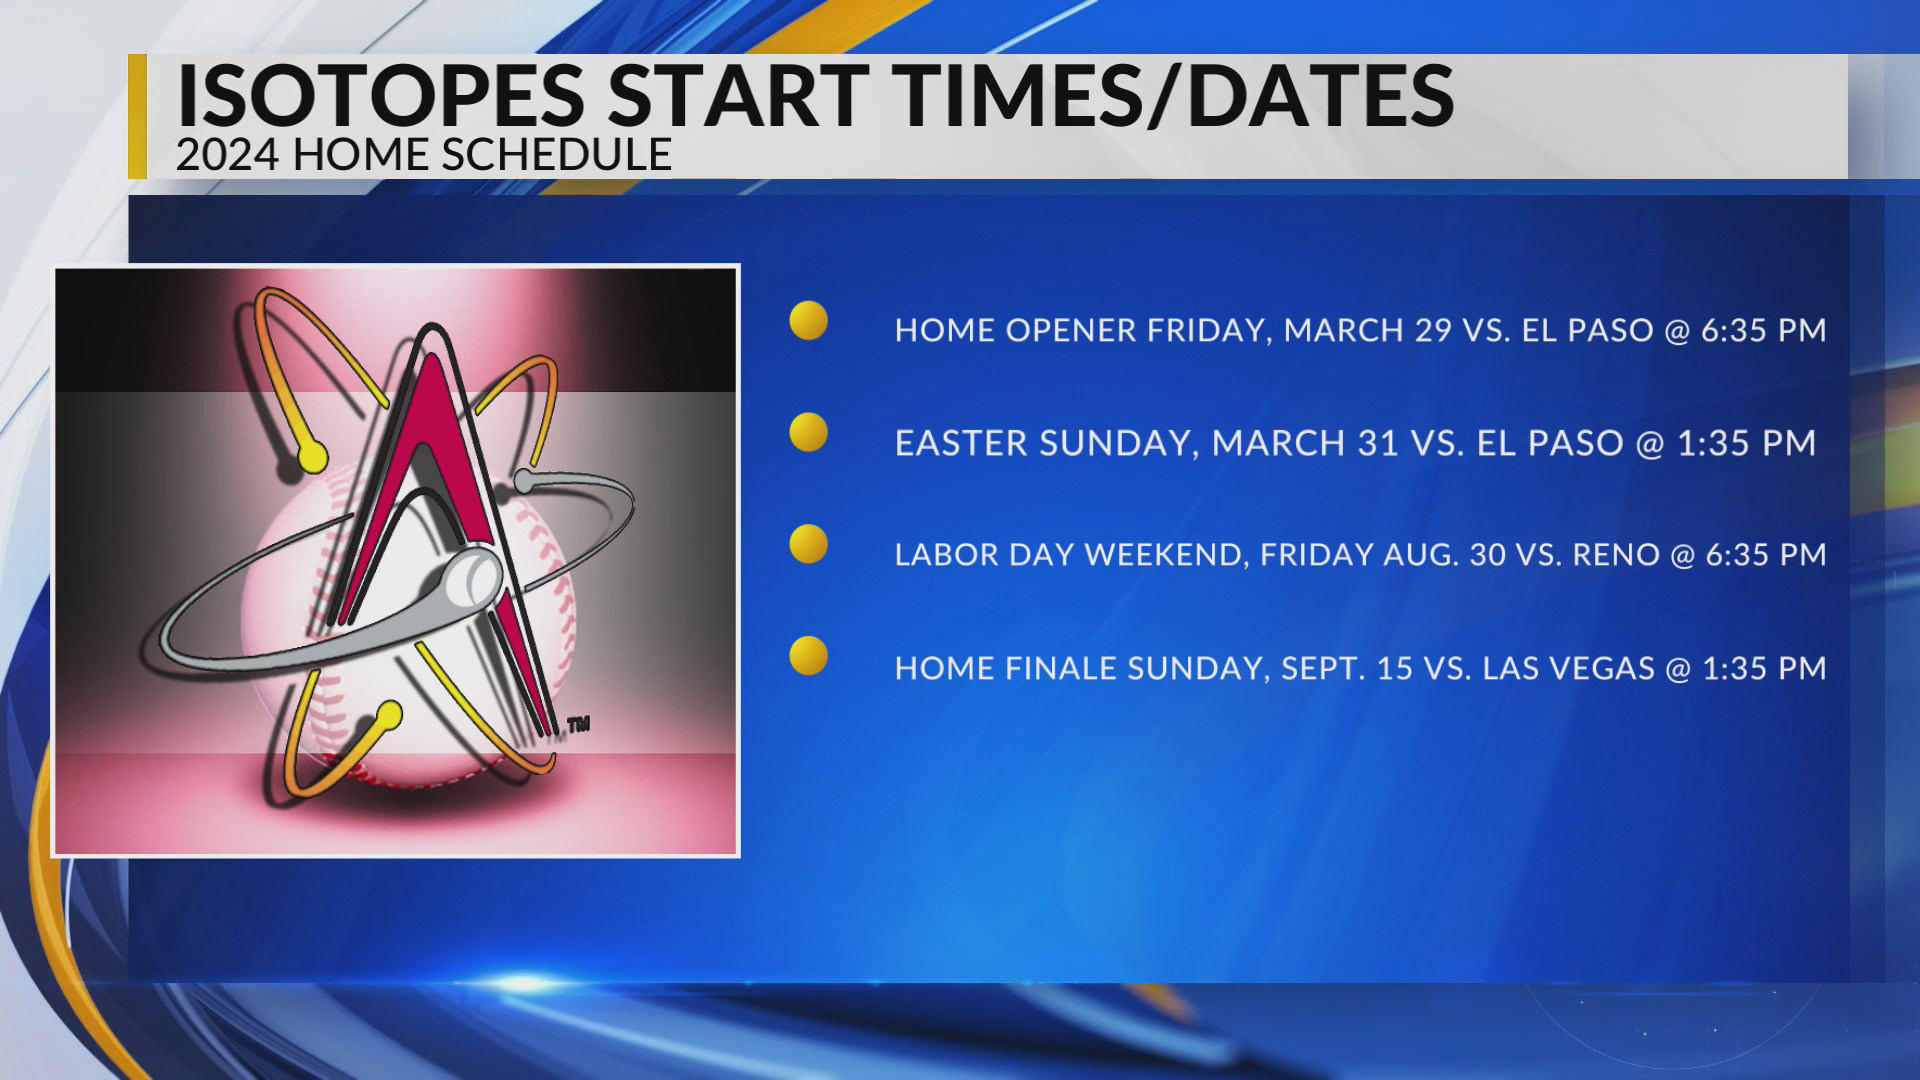 Albuquerque Isotopes announce 2024 home game schedule